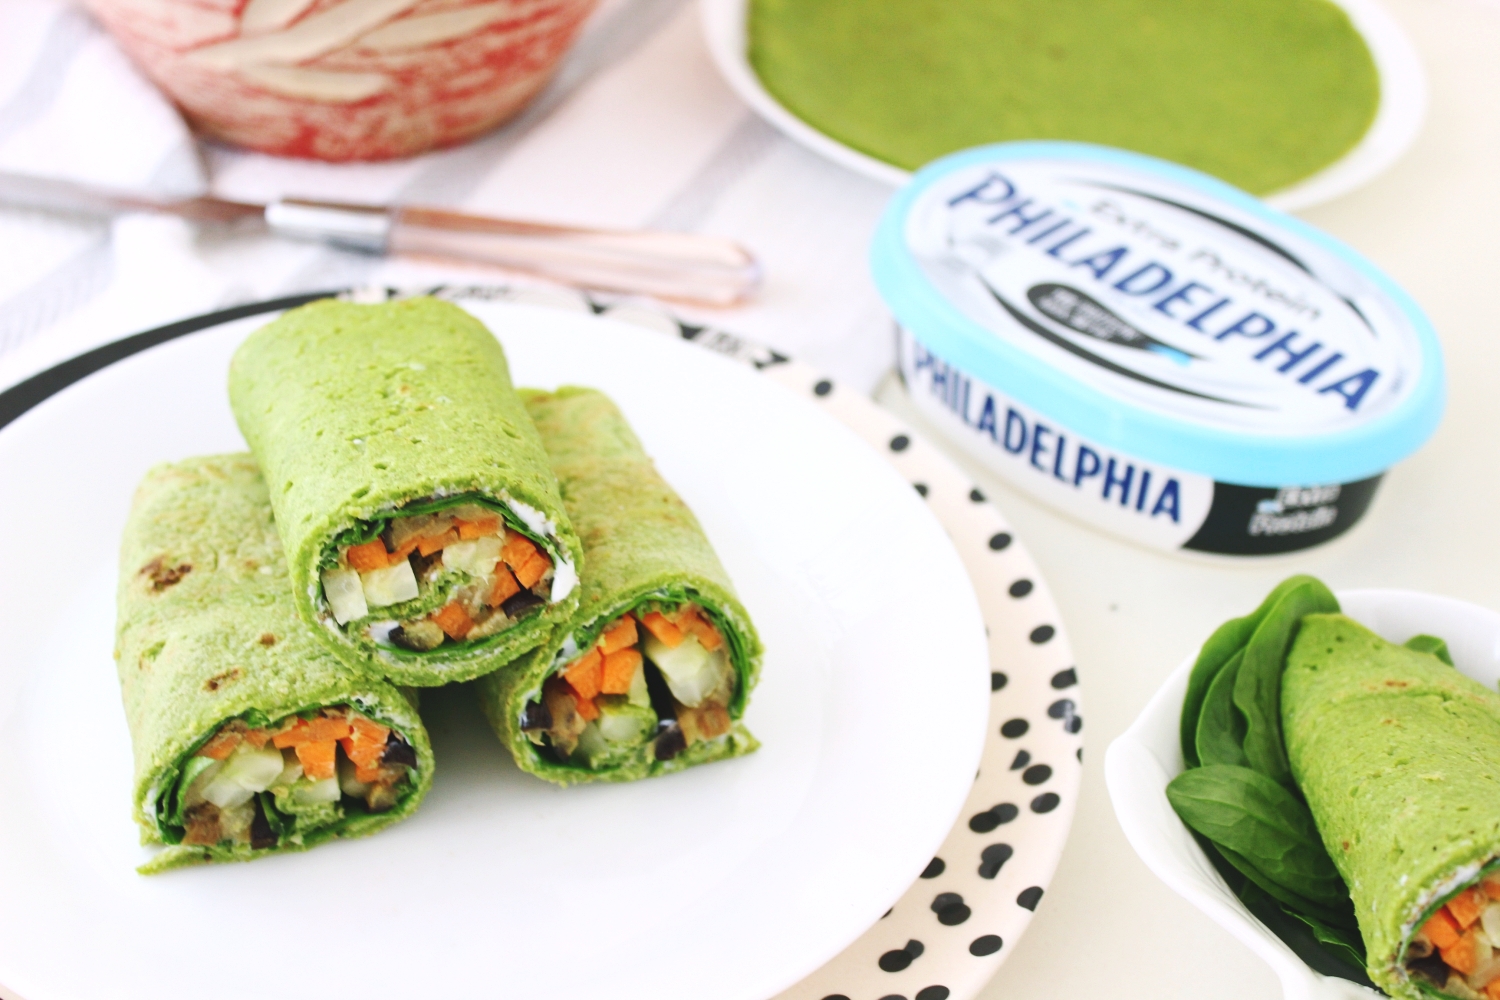 healthy low fat high protein spinach wraps tortillas filled with Philadelphia extra protein cream cheese